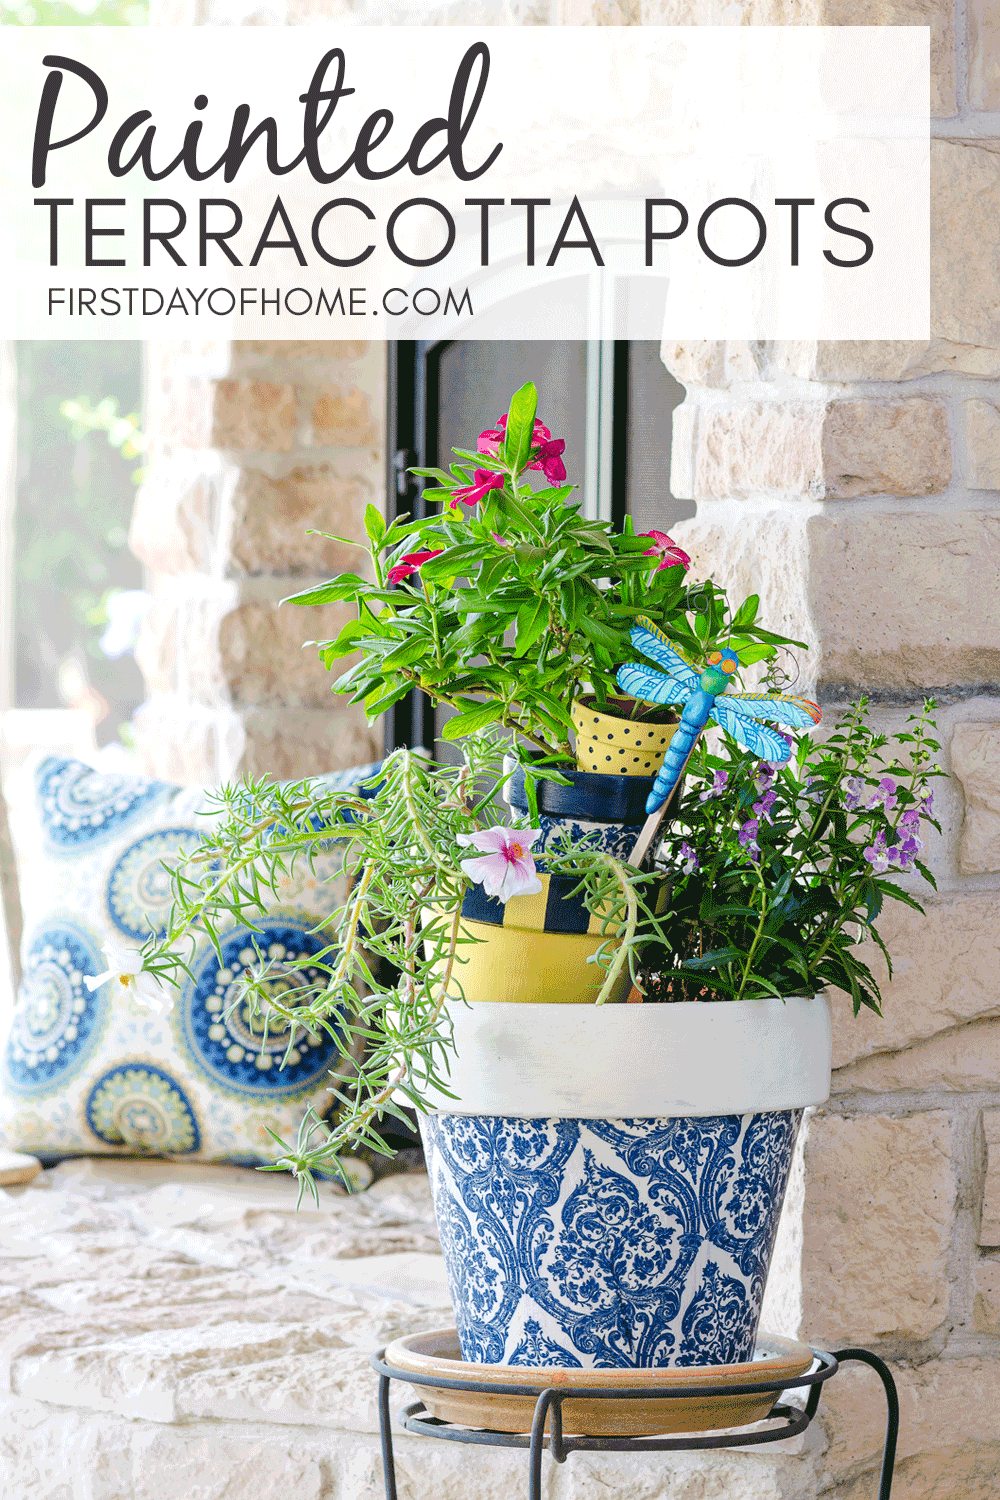 Painting Terracotta Pots Like The Pros, How To Paint Ceramic Outdoor Pots